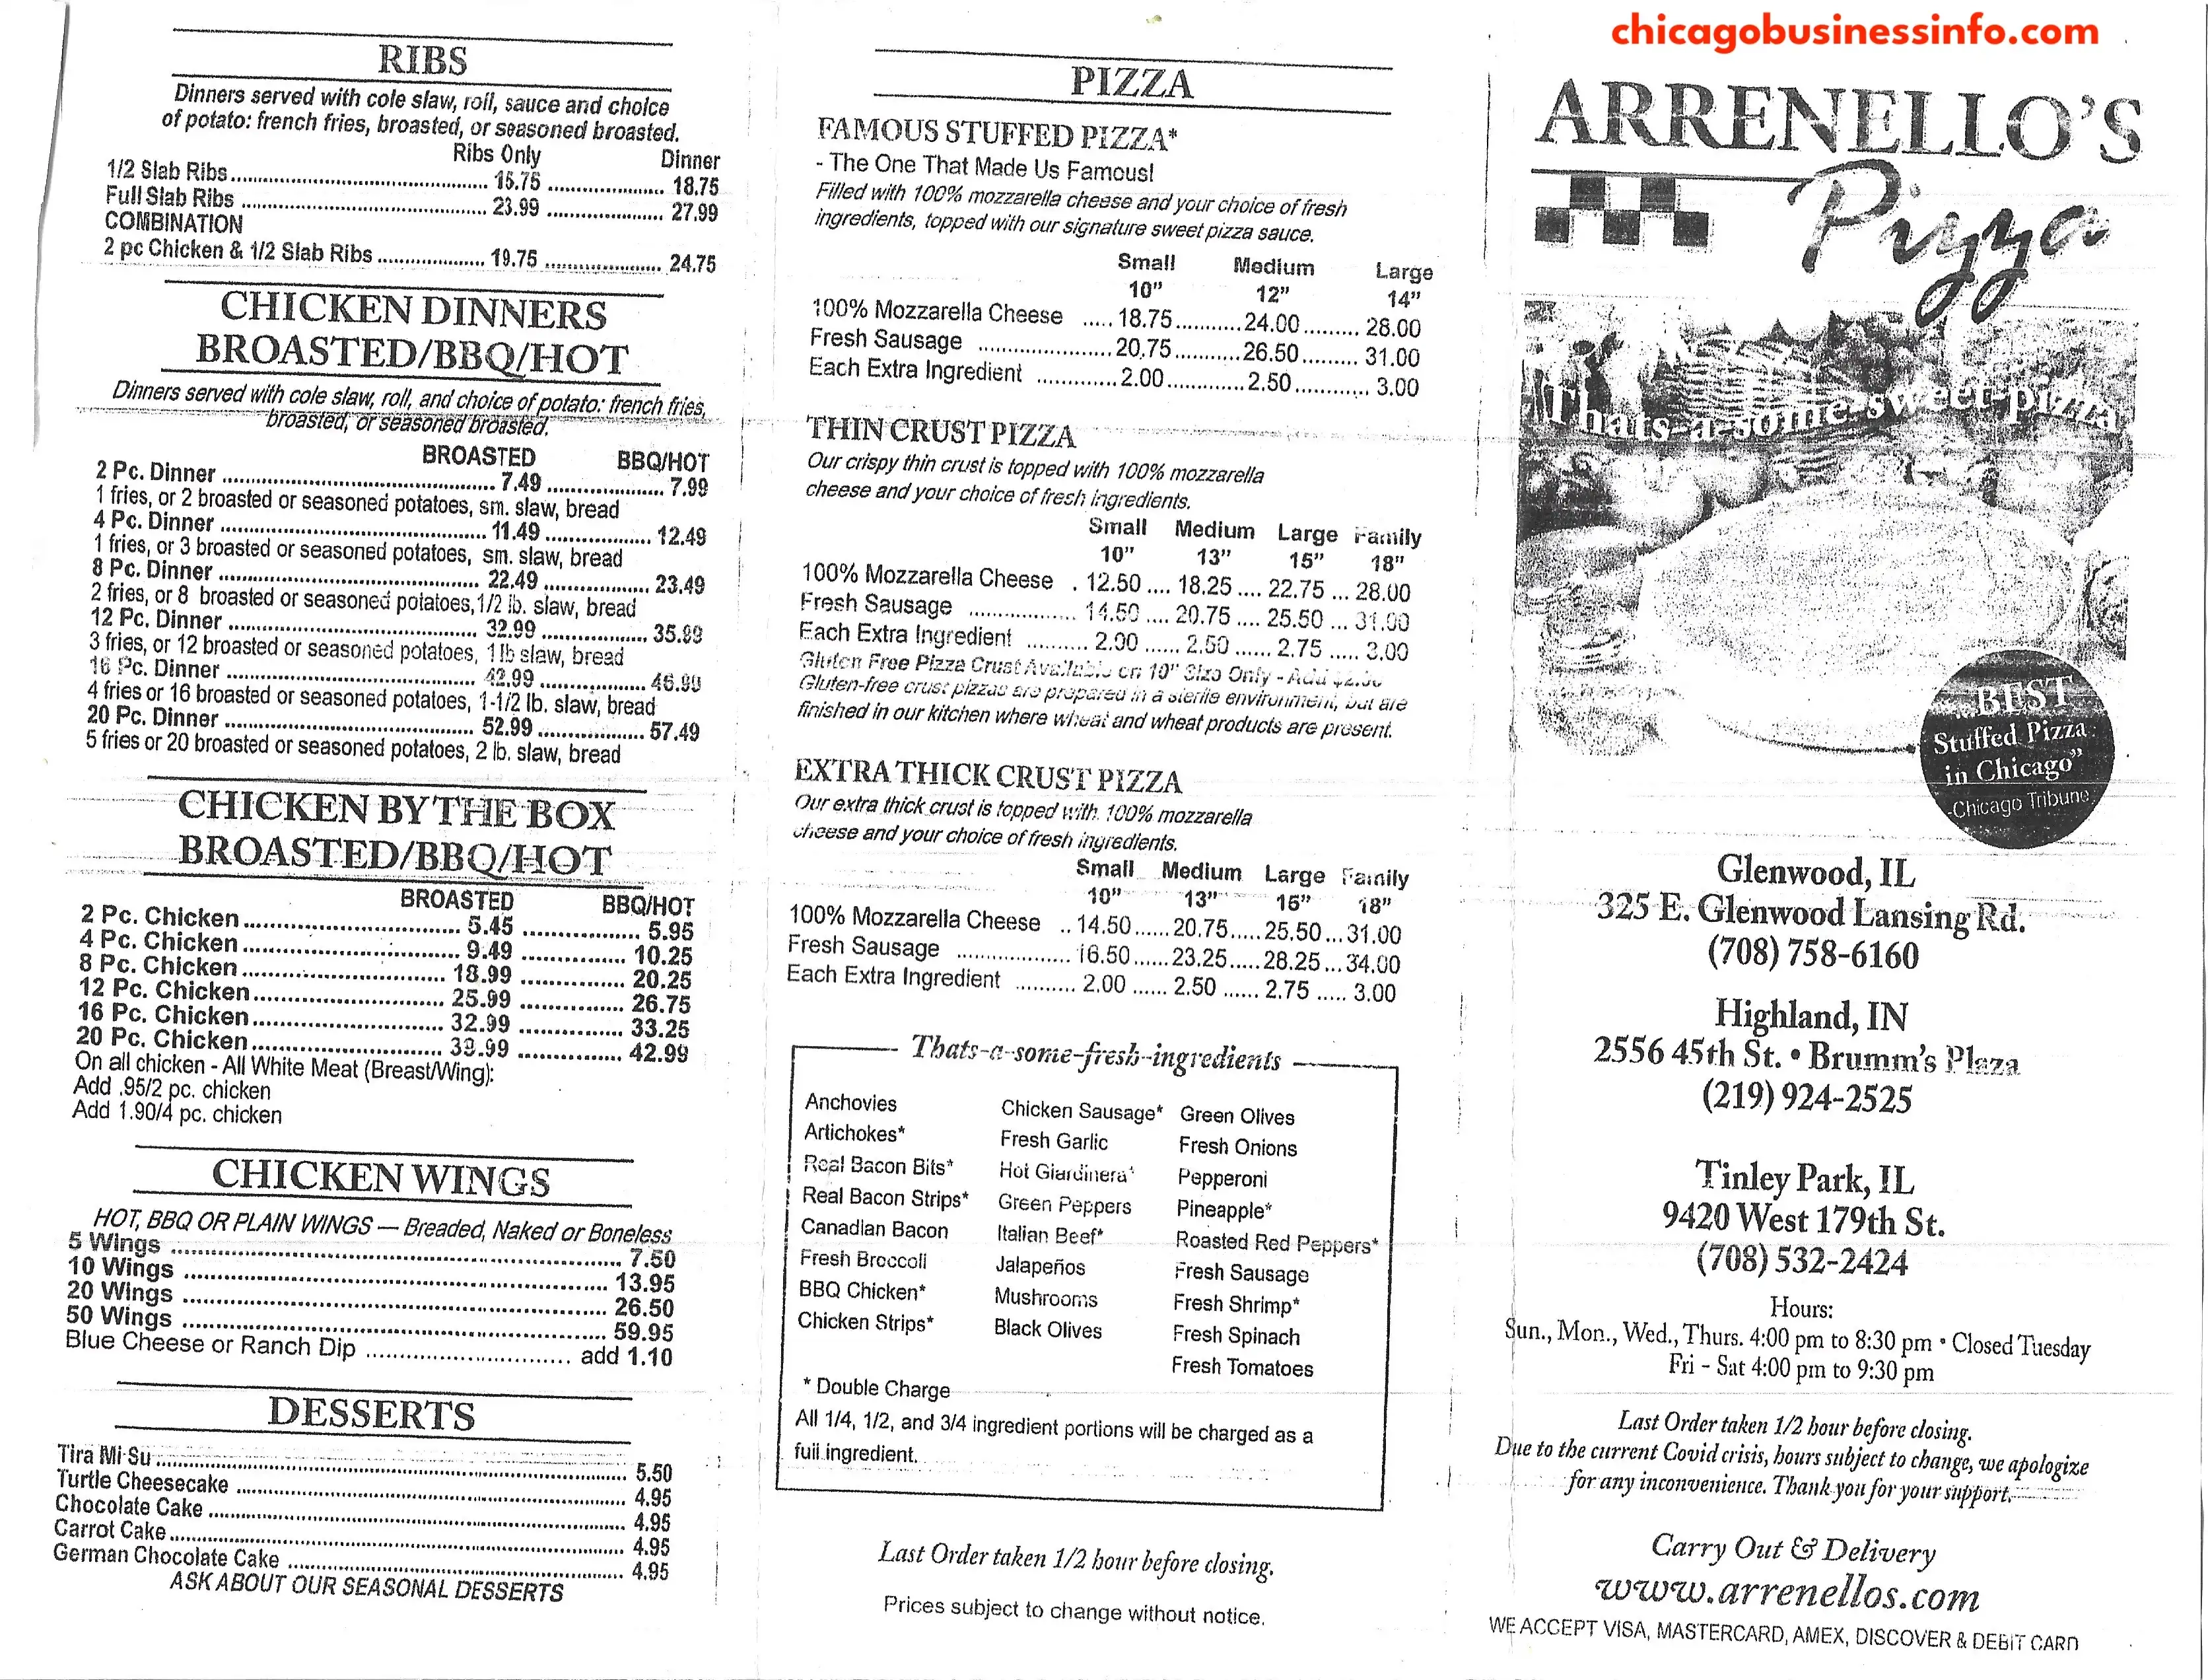 Arrenello's Pizza Carry Out Menu With Prices 1